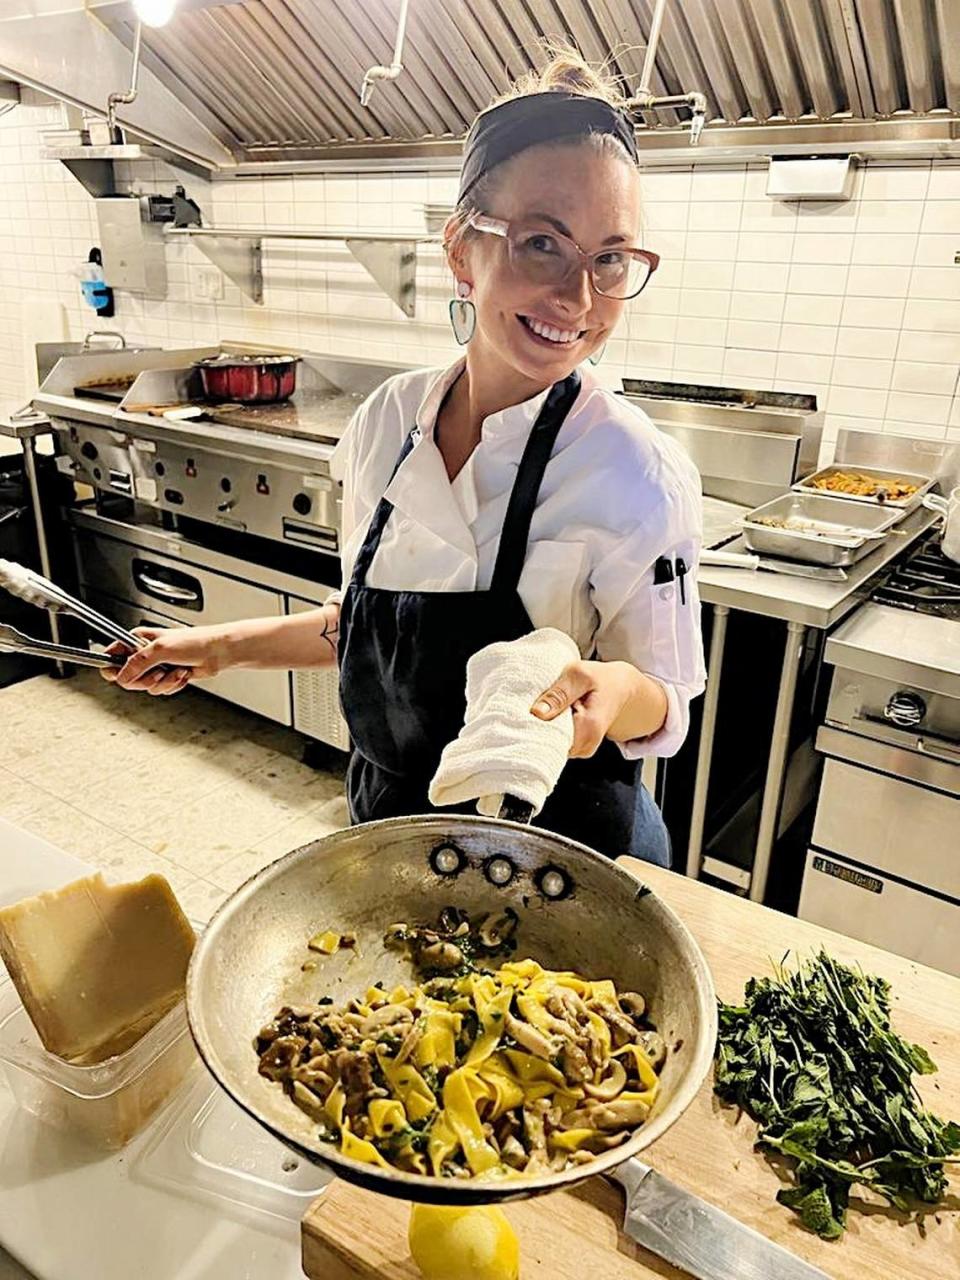 Jess Masanotti, photographed working the saute station at North Miznon in New York City. “It’s the one where we make our homemade pasta, sauces, et cetera, and requires a lot of skill,” she says. “It was a huge deal for me when I worked up to saute and could hold the station on my own on a 100-plus cover night.”